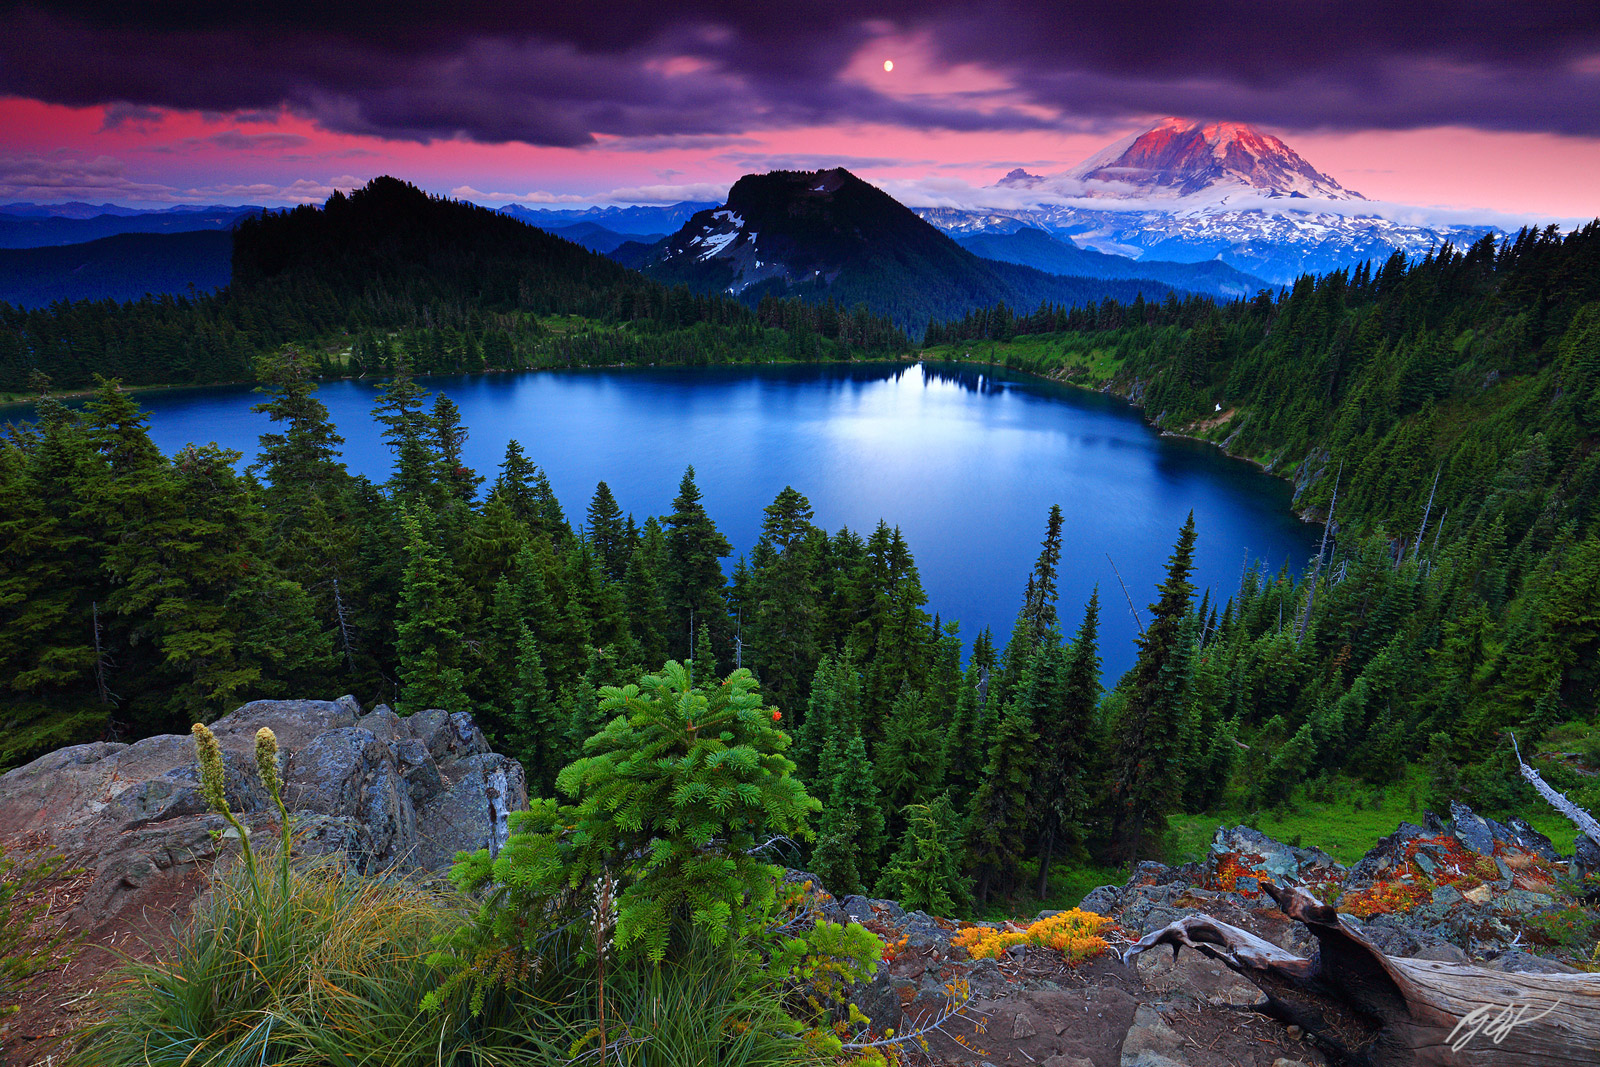 Sunset Mt Rainier and Summit Lake in the Clearwater Wilderness in Washington